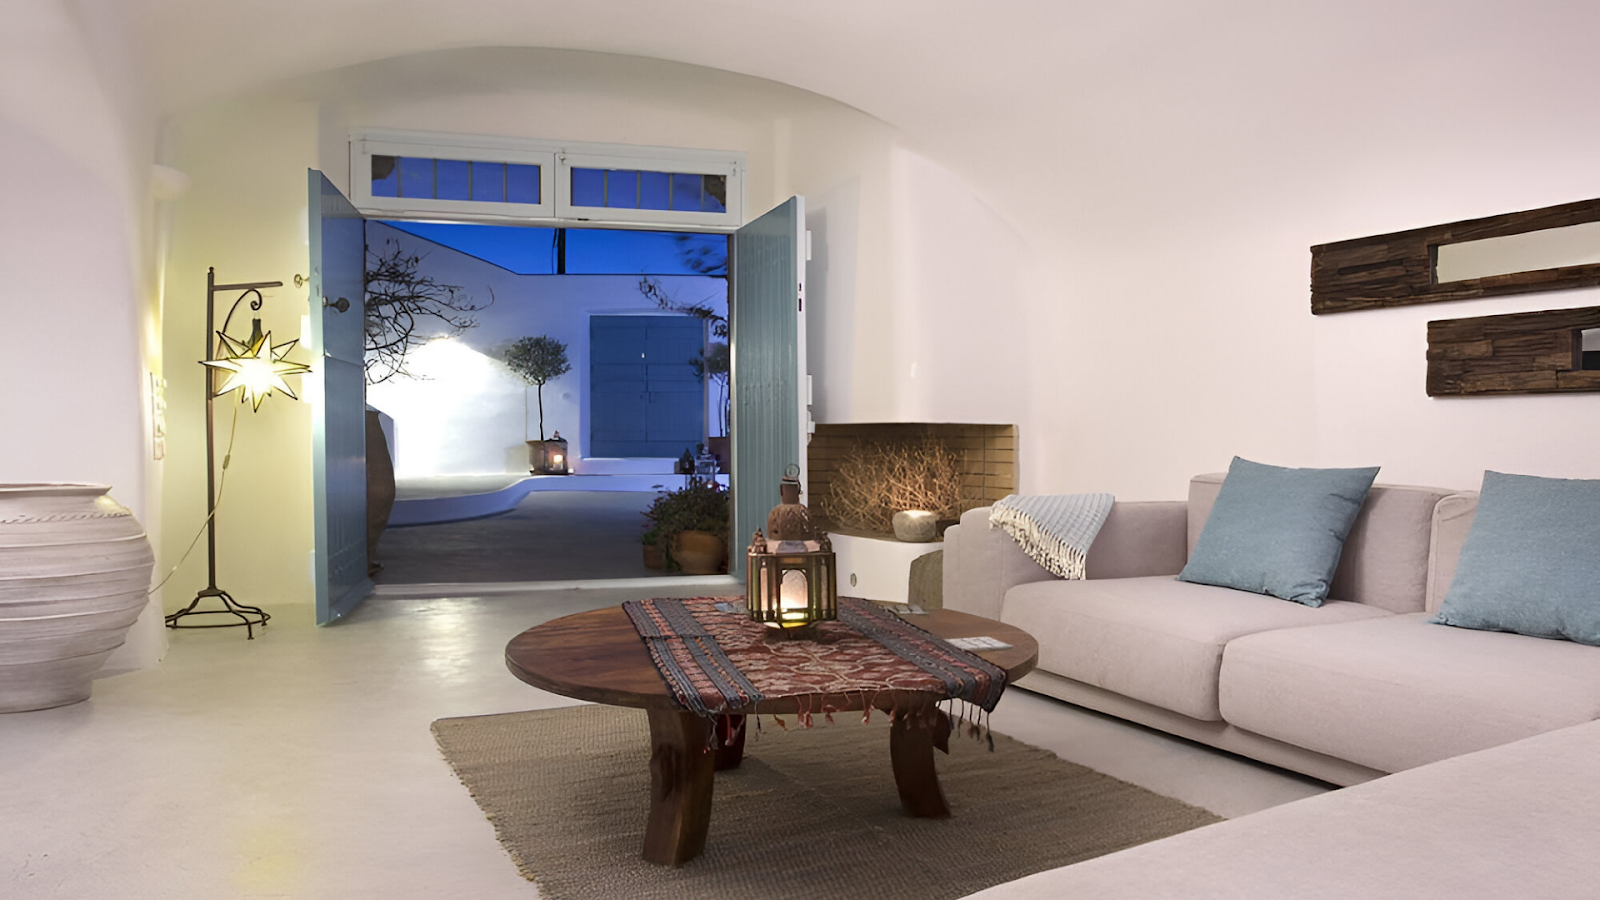 A living area with couches and a wooden round table of a house in Santorini 